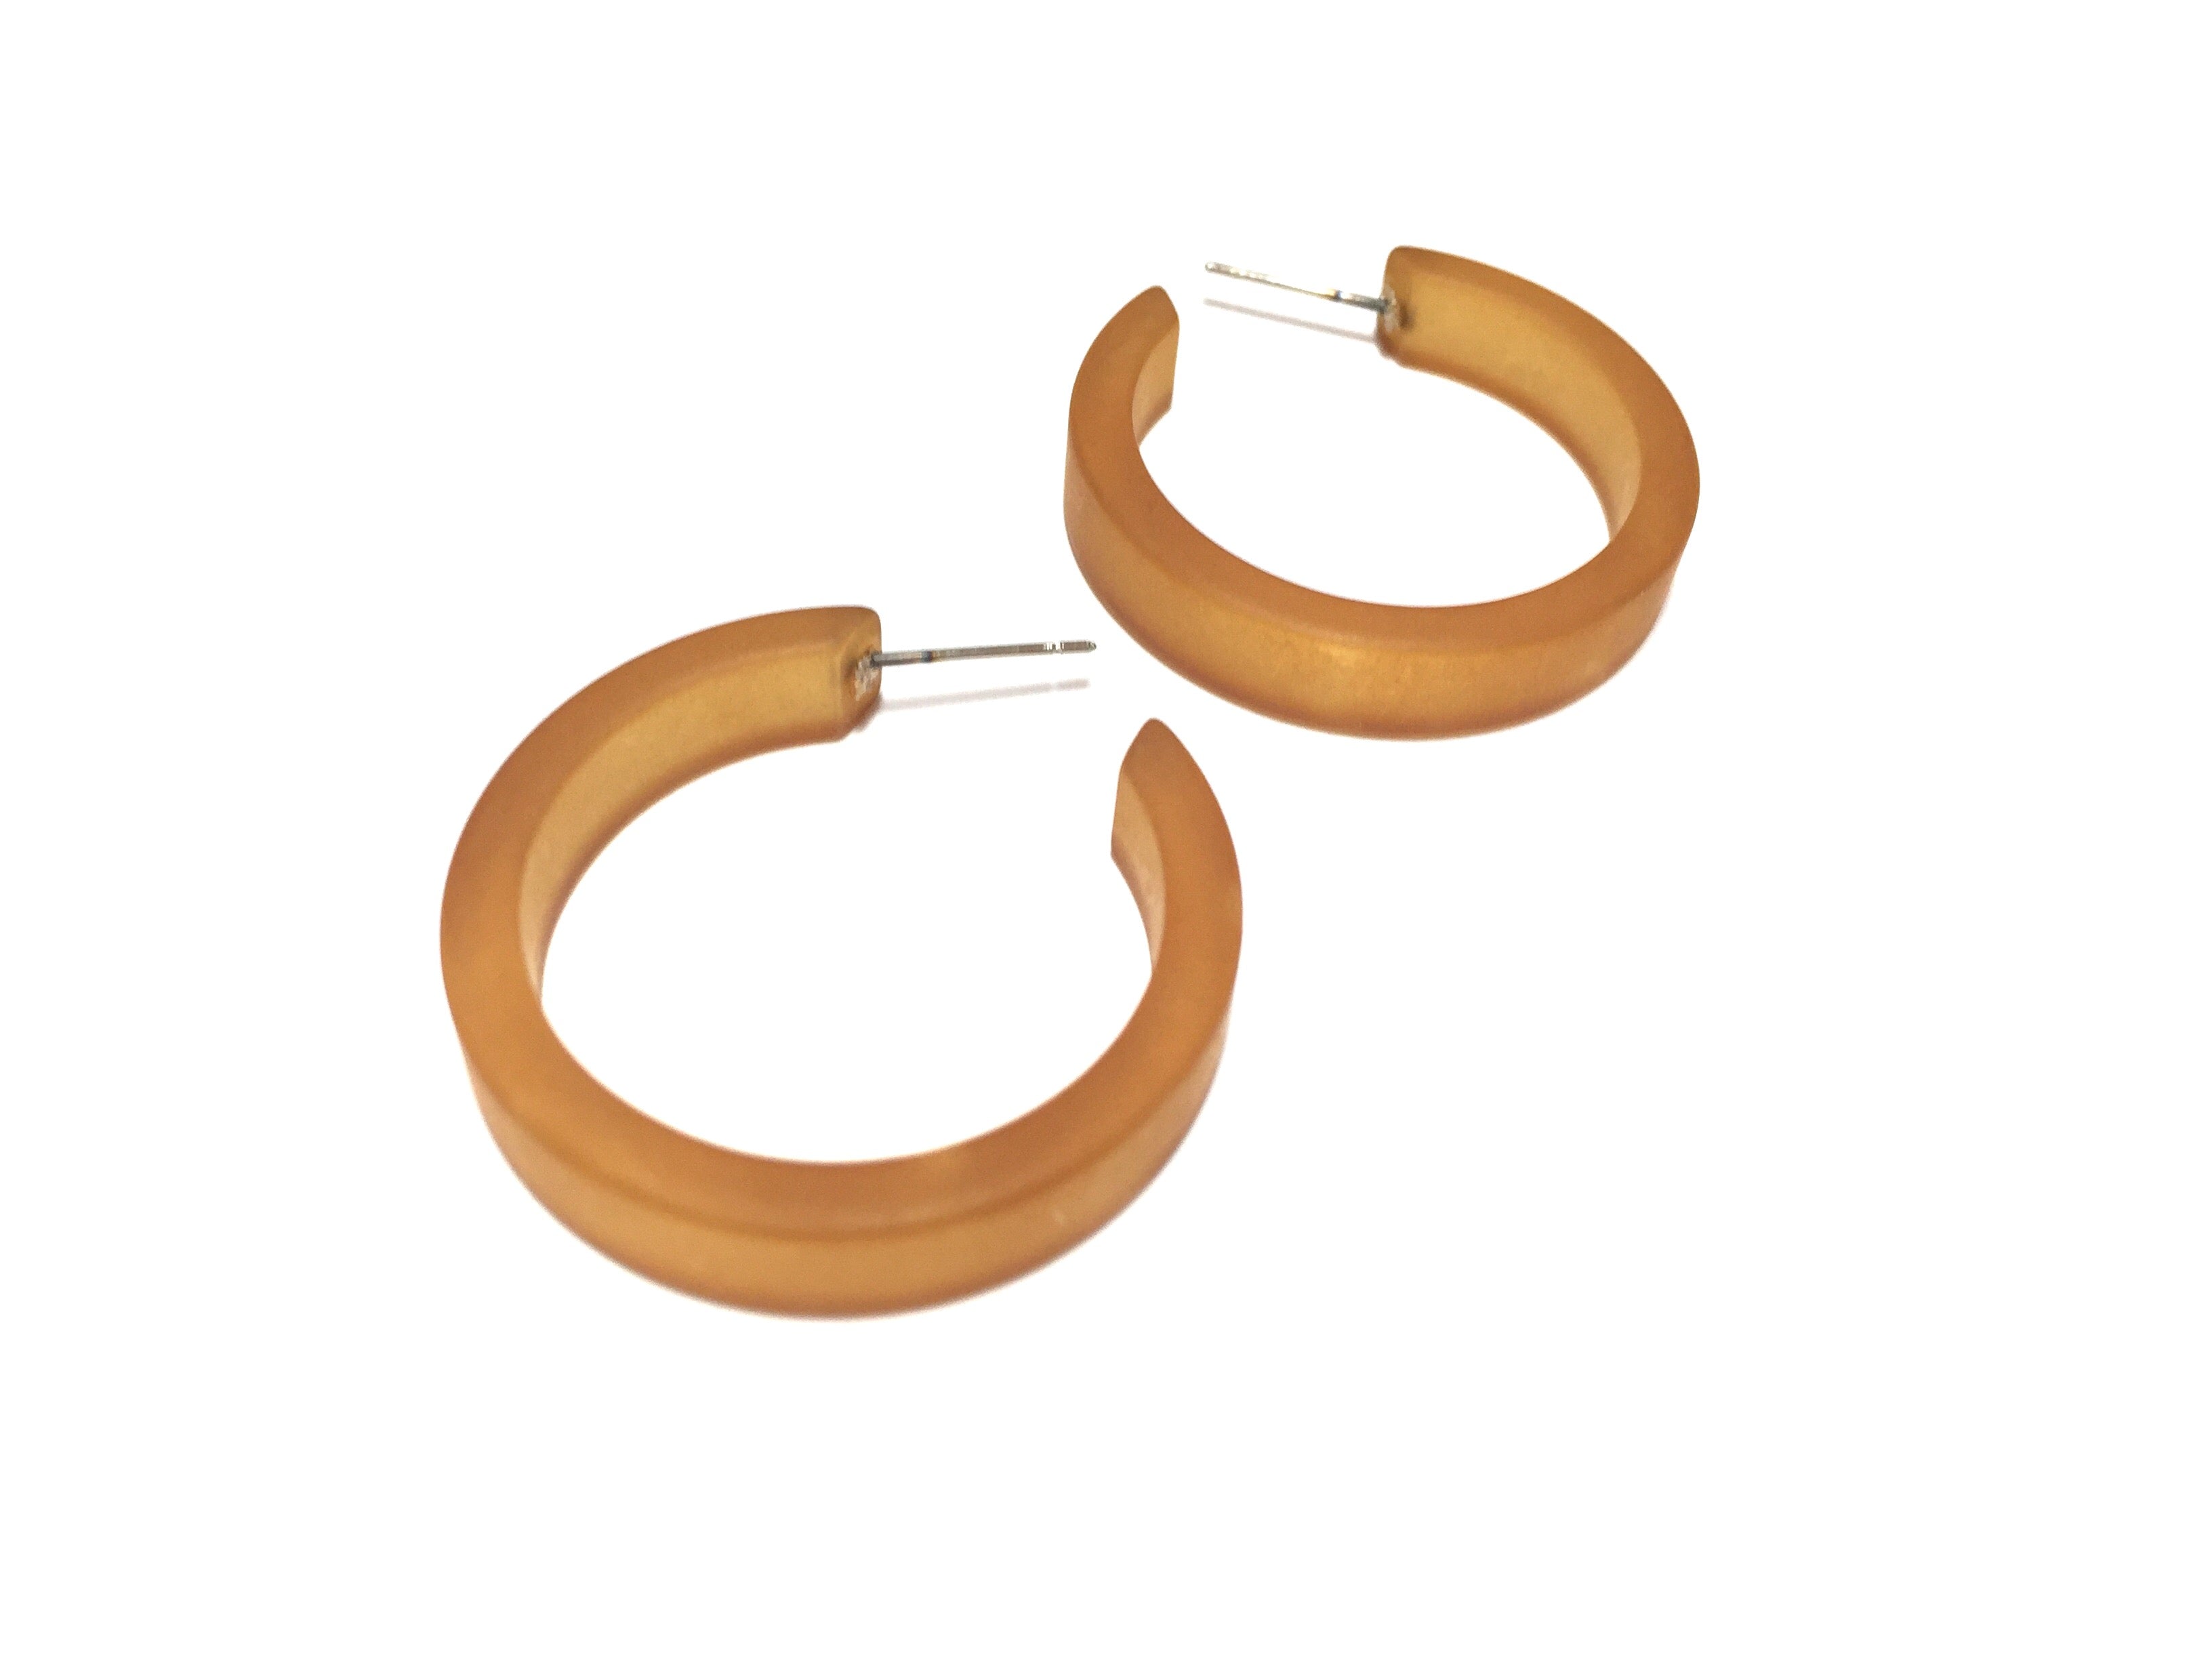 Terracotta Frosted Small Classic Hoop Earrings